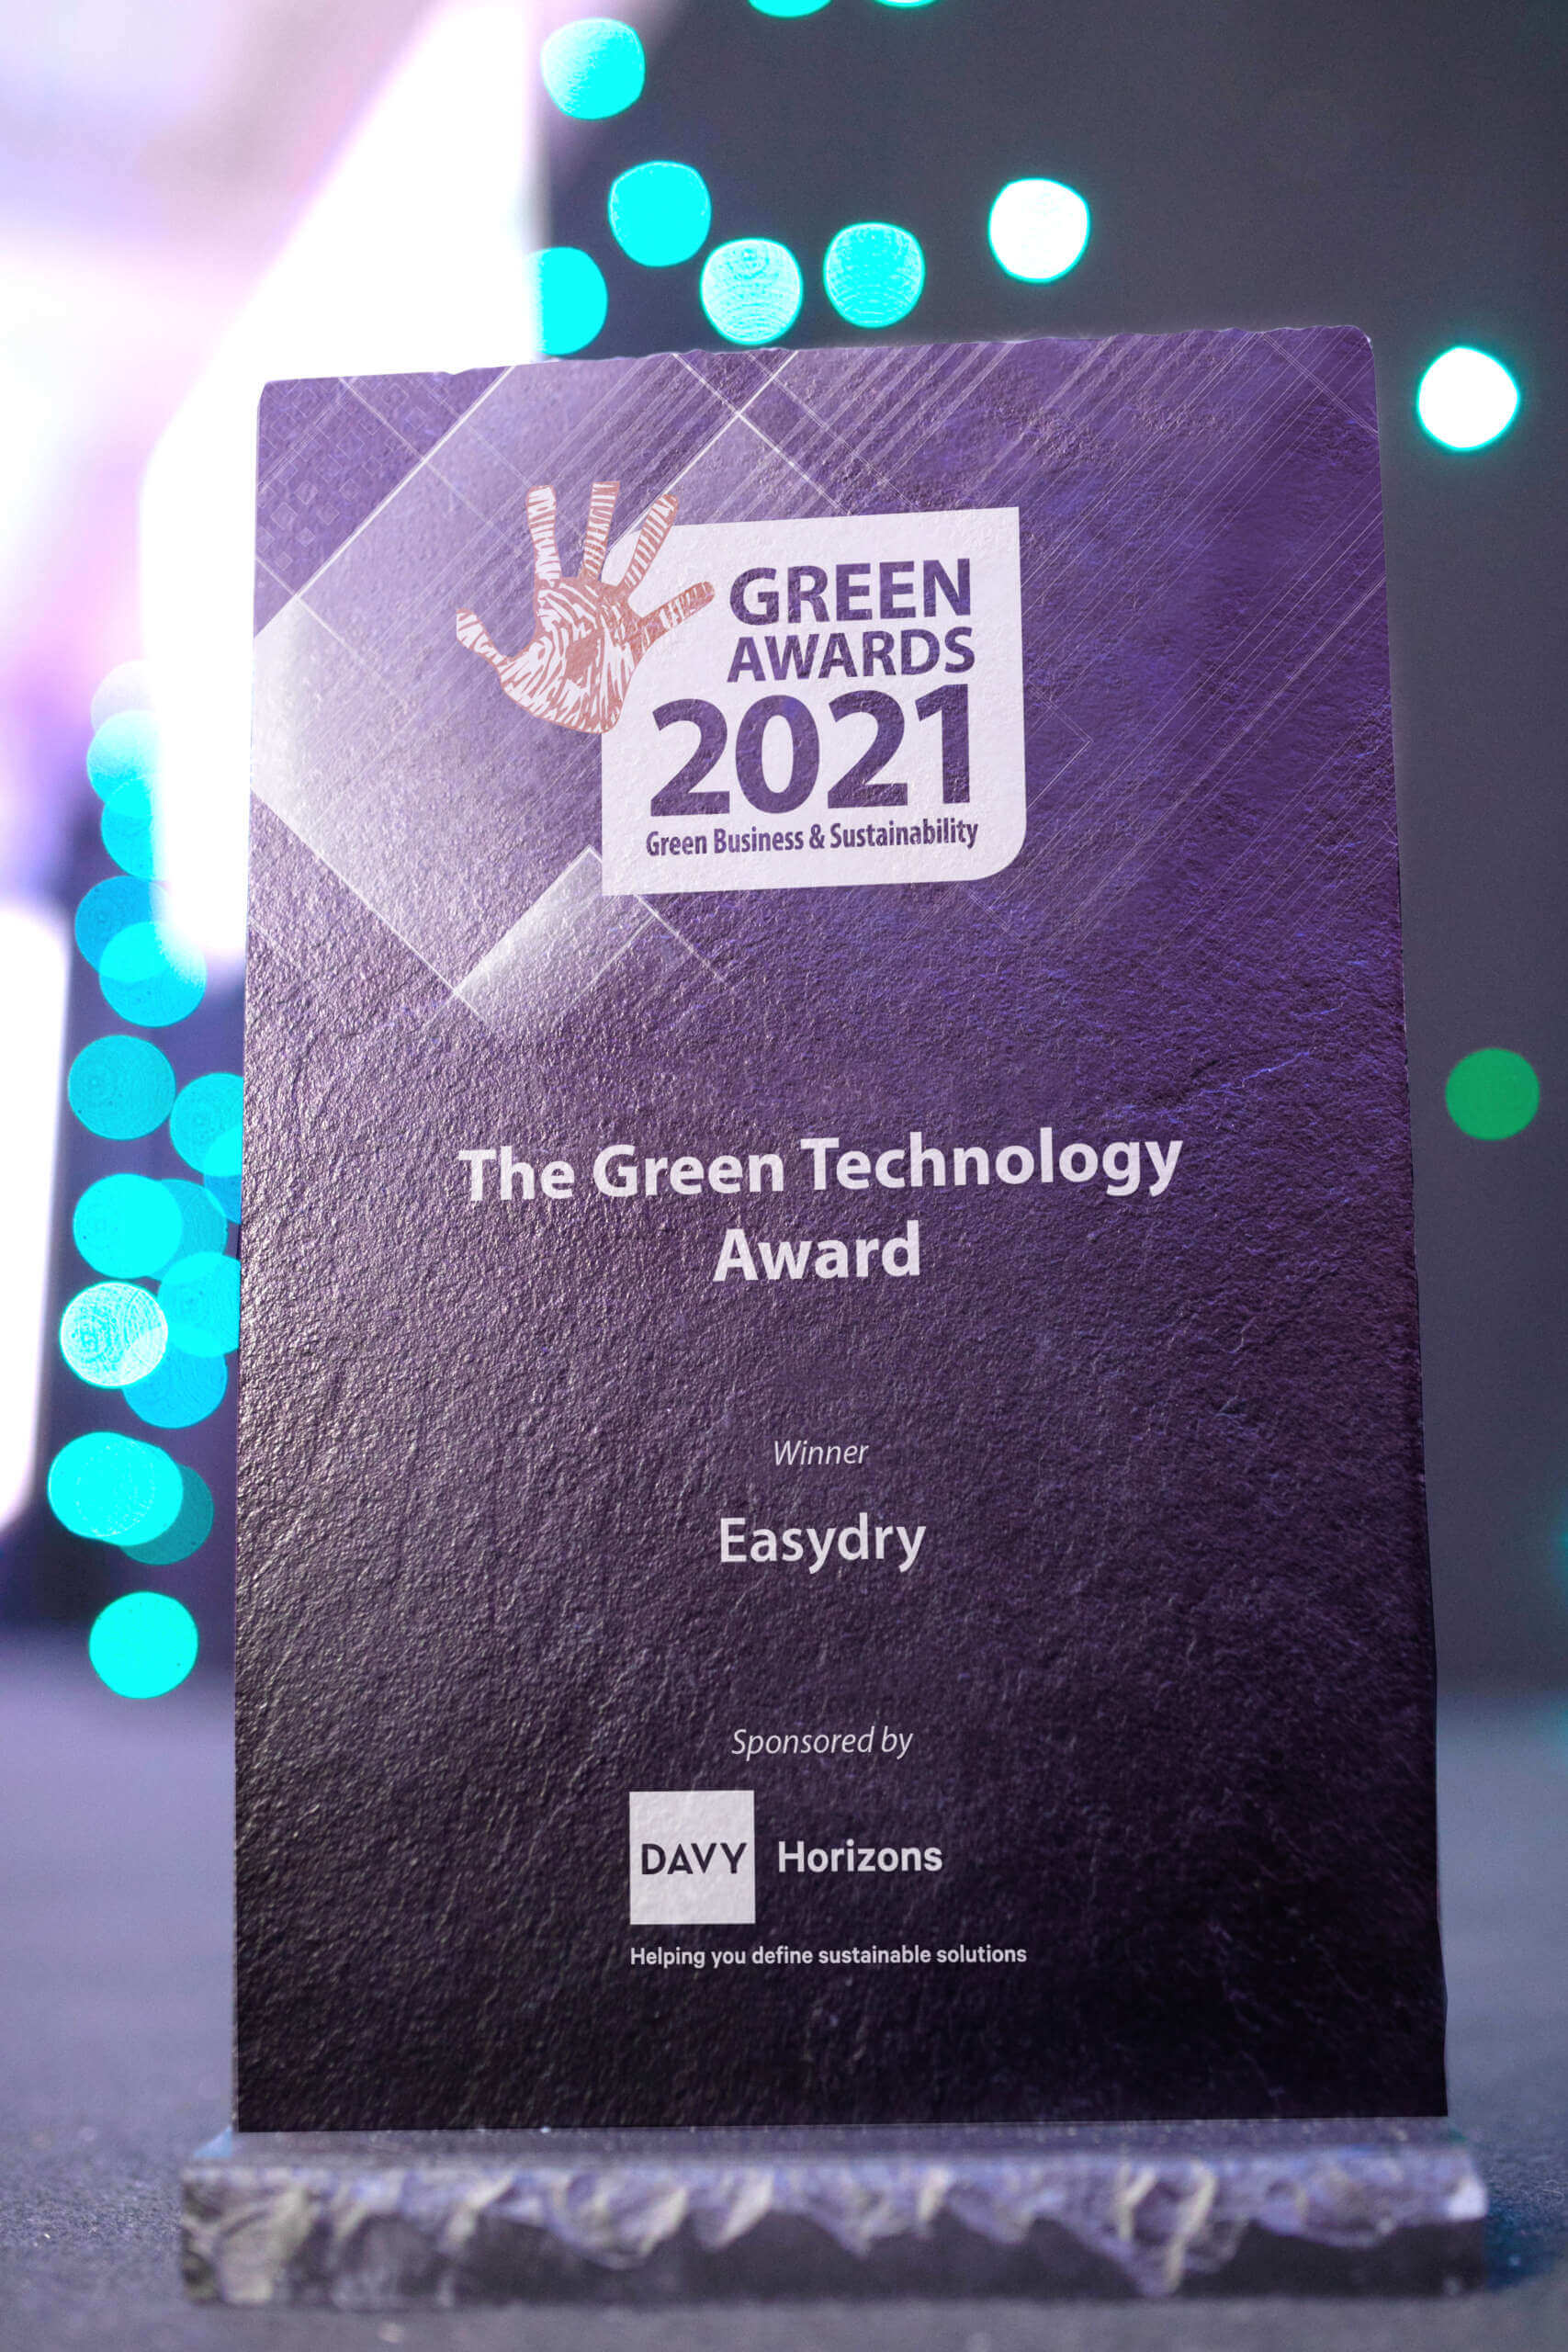 Easydry win Green Technology Award 2021! We were overjoyed to win. Click to see the full list of winners ...